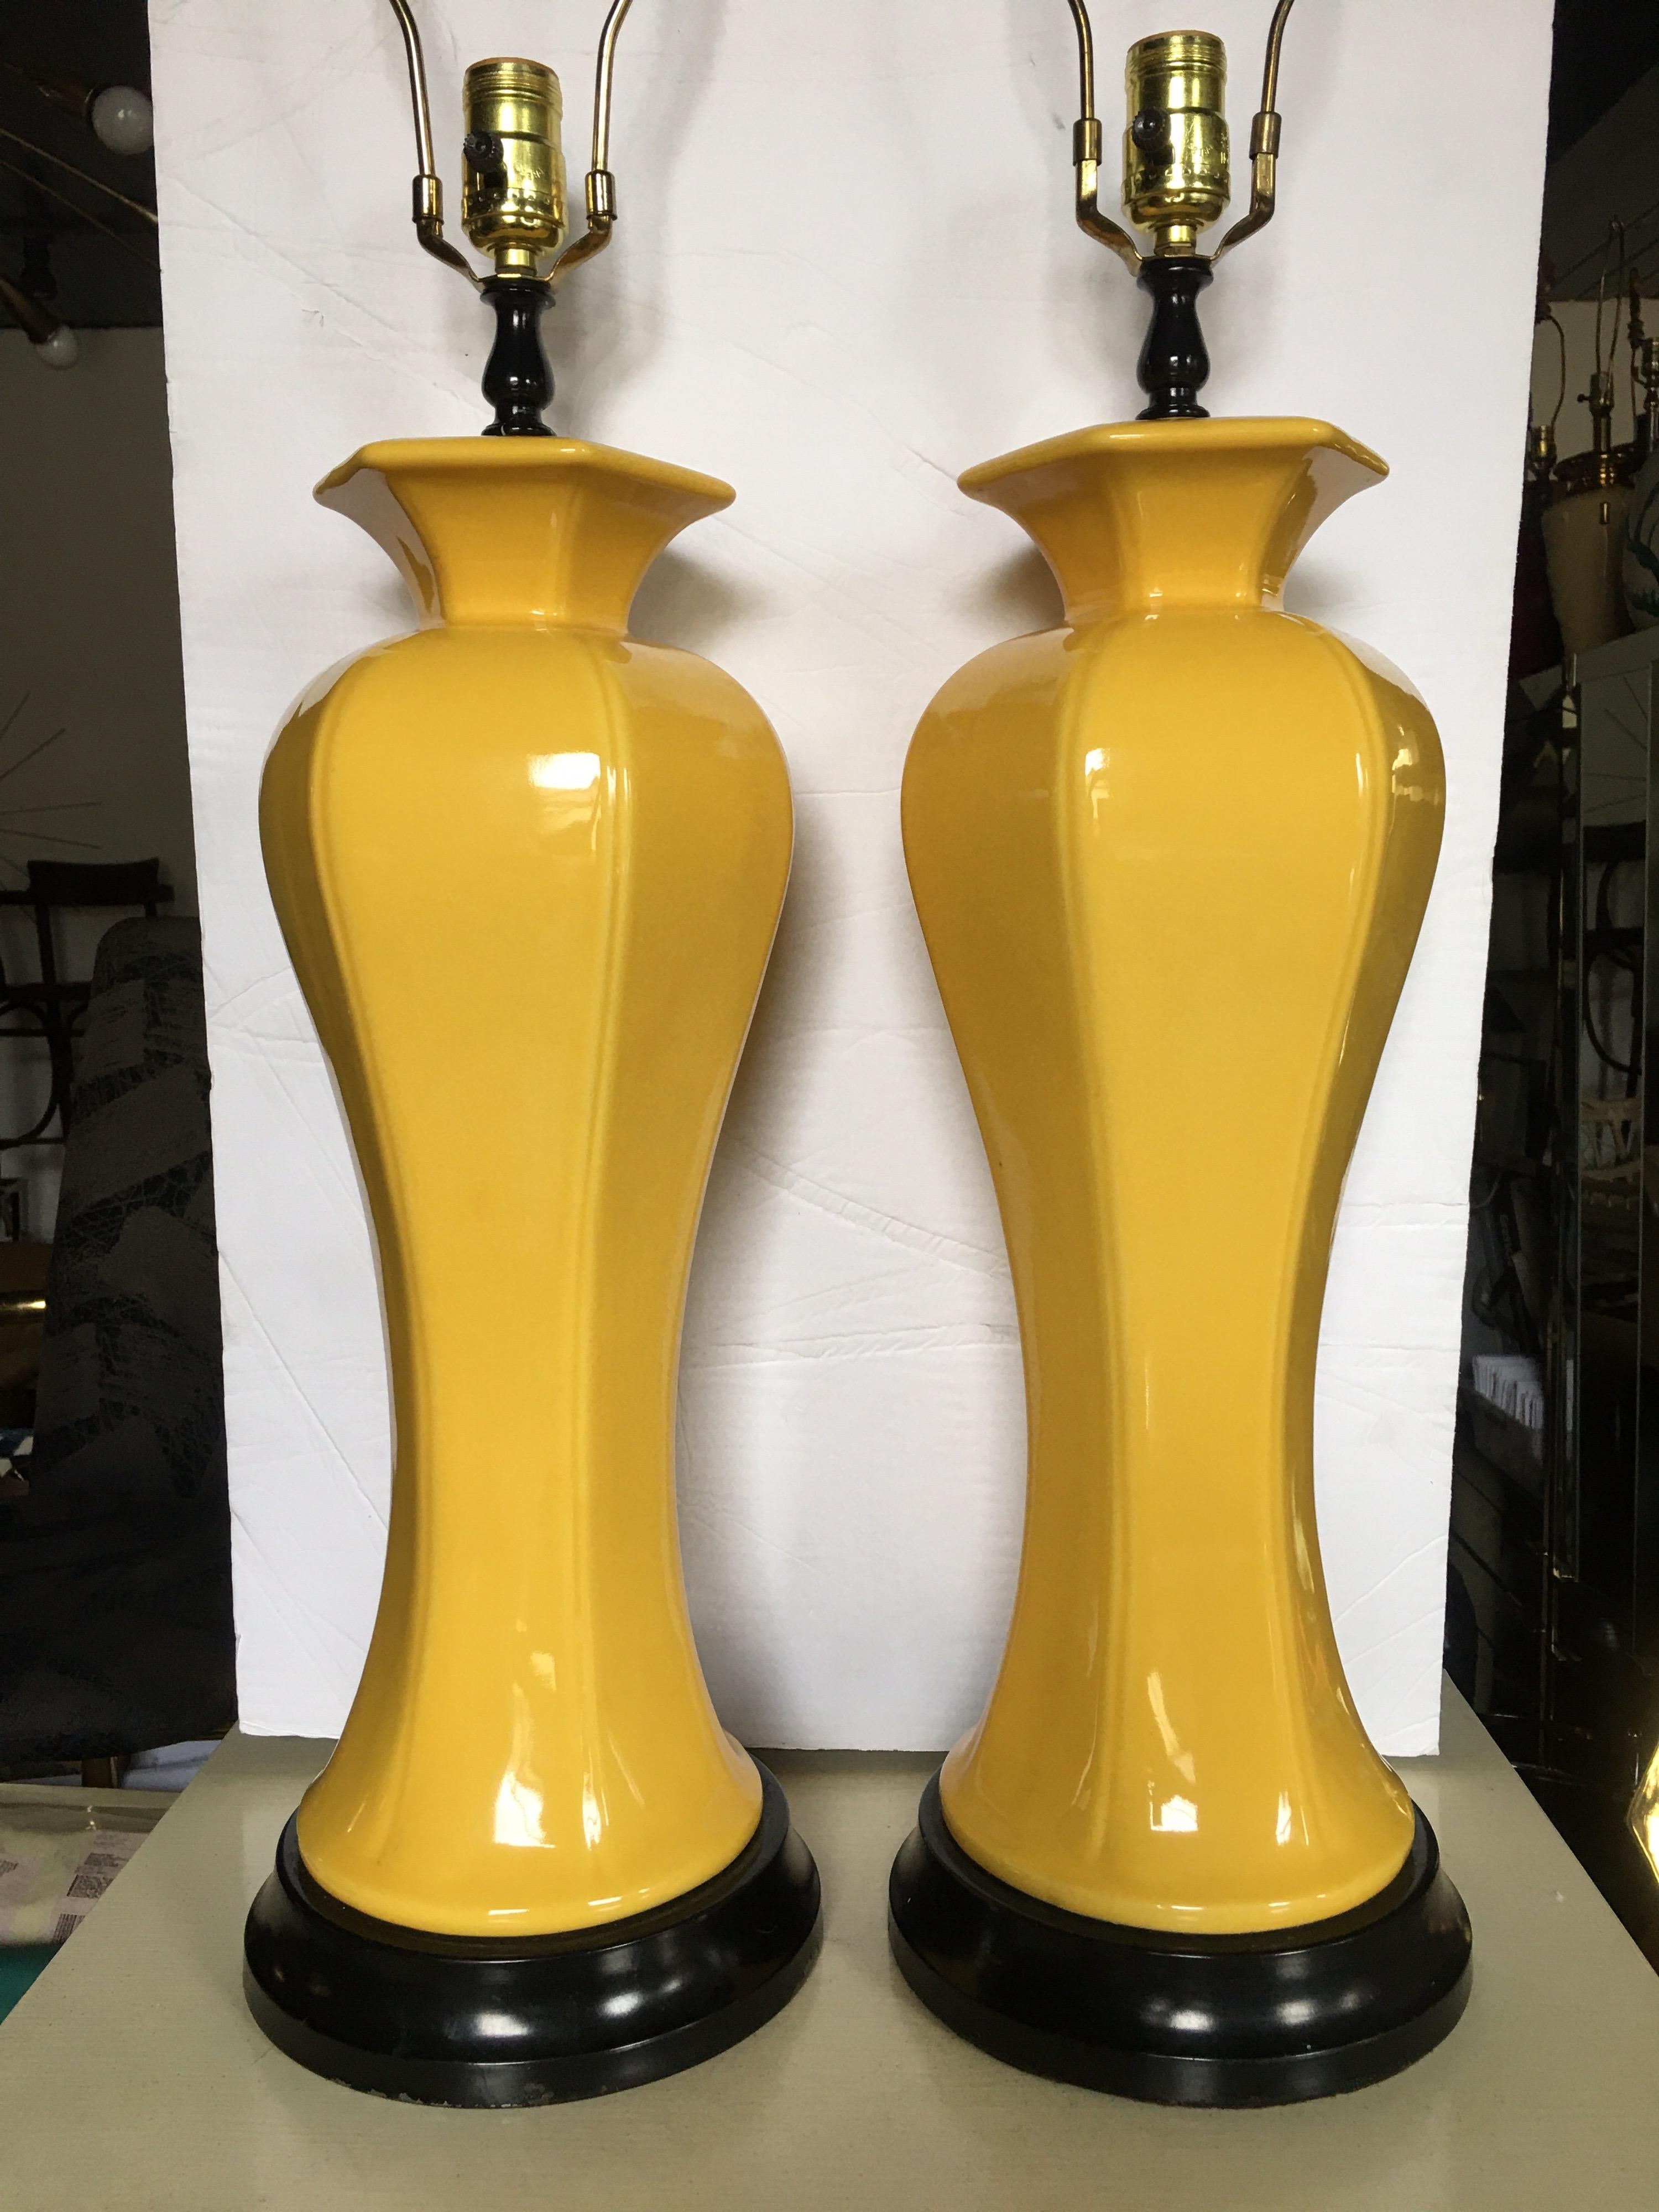 Sculptural Pair of Hollywood Regency Chinoiserie tall sunny yellow ceramic glazed table lamps mounted on black plinth bases. 

Measures: Height to finial 33 inches.
Height to socket 25.5 inches.